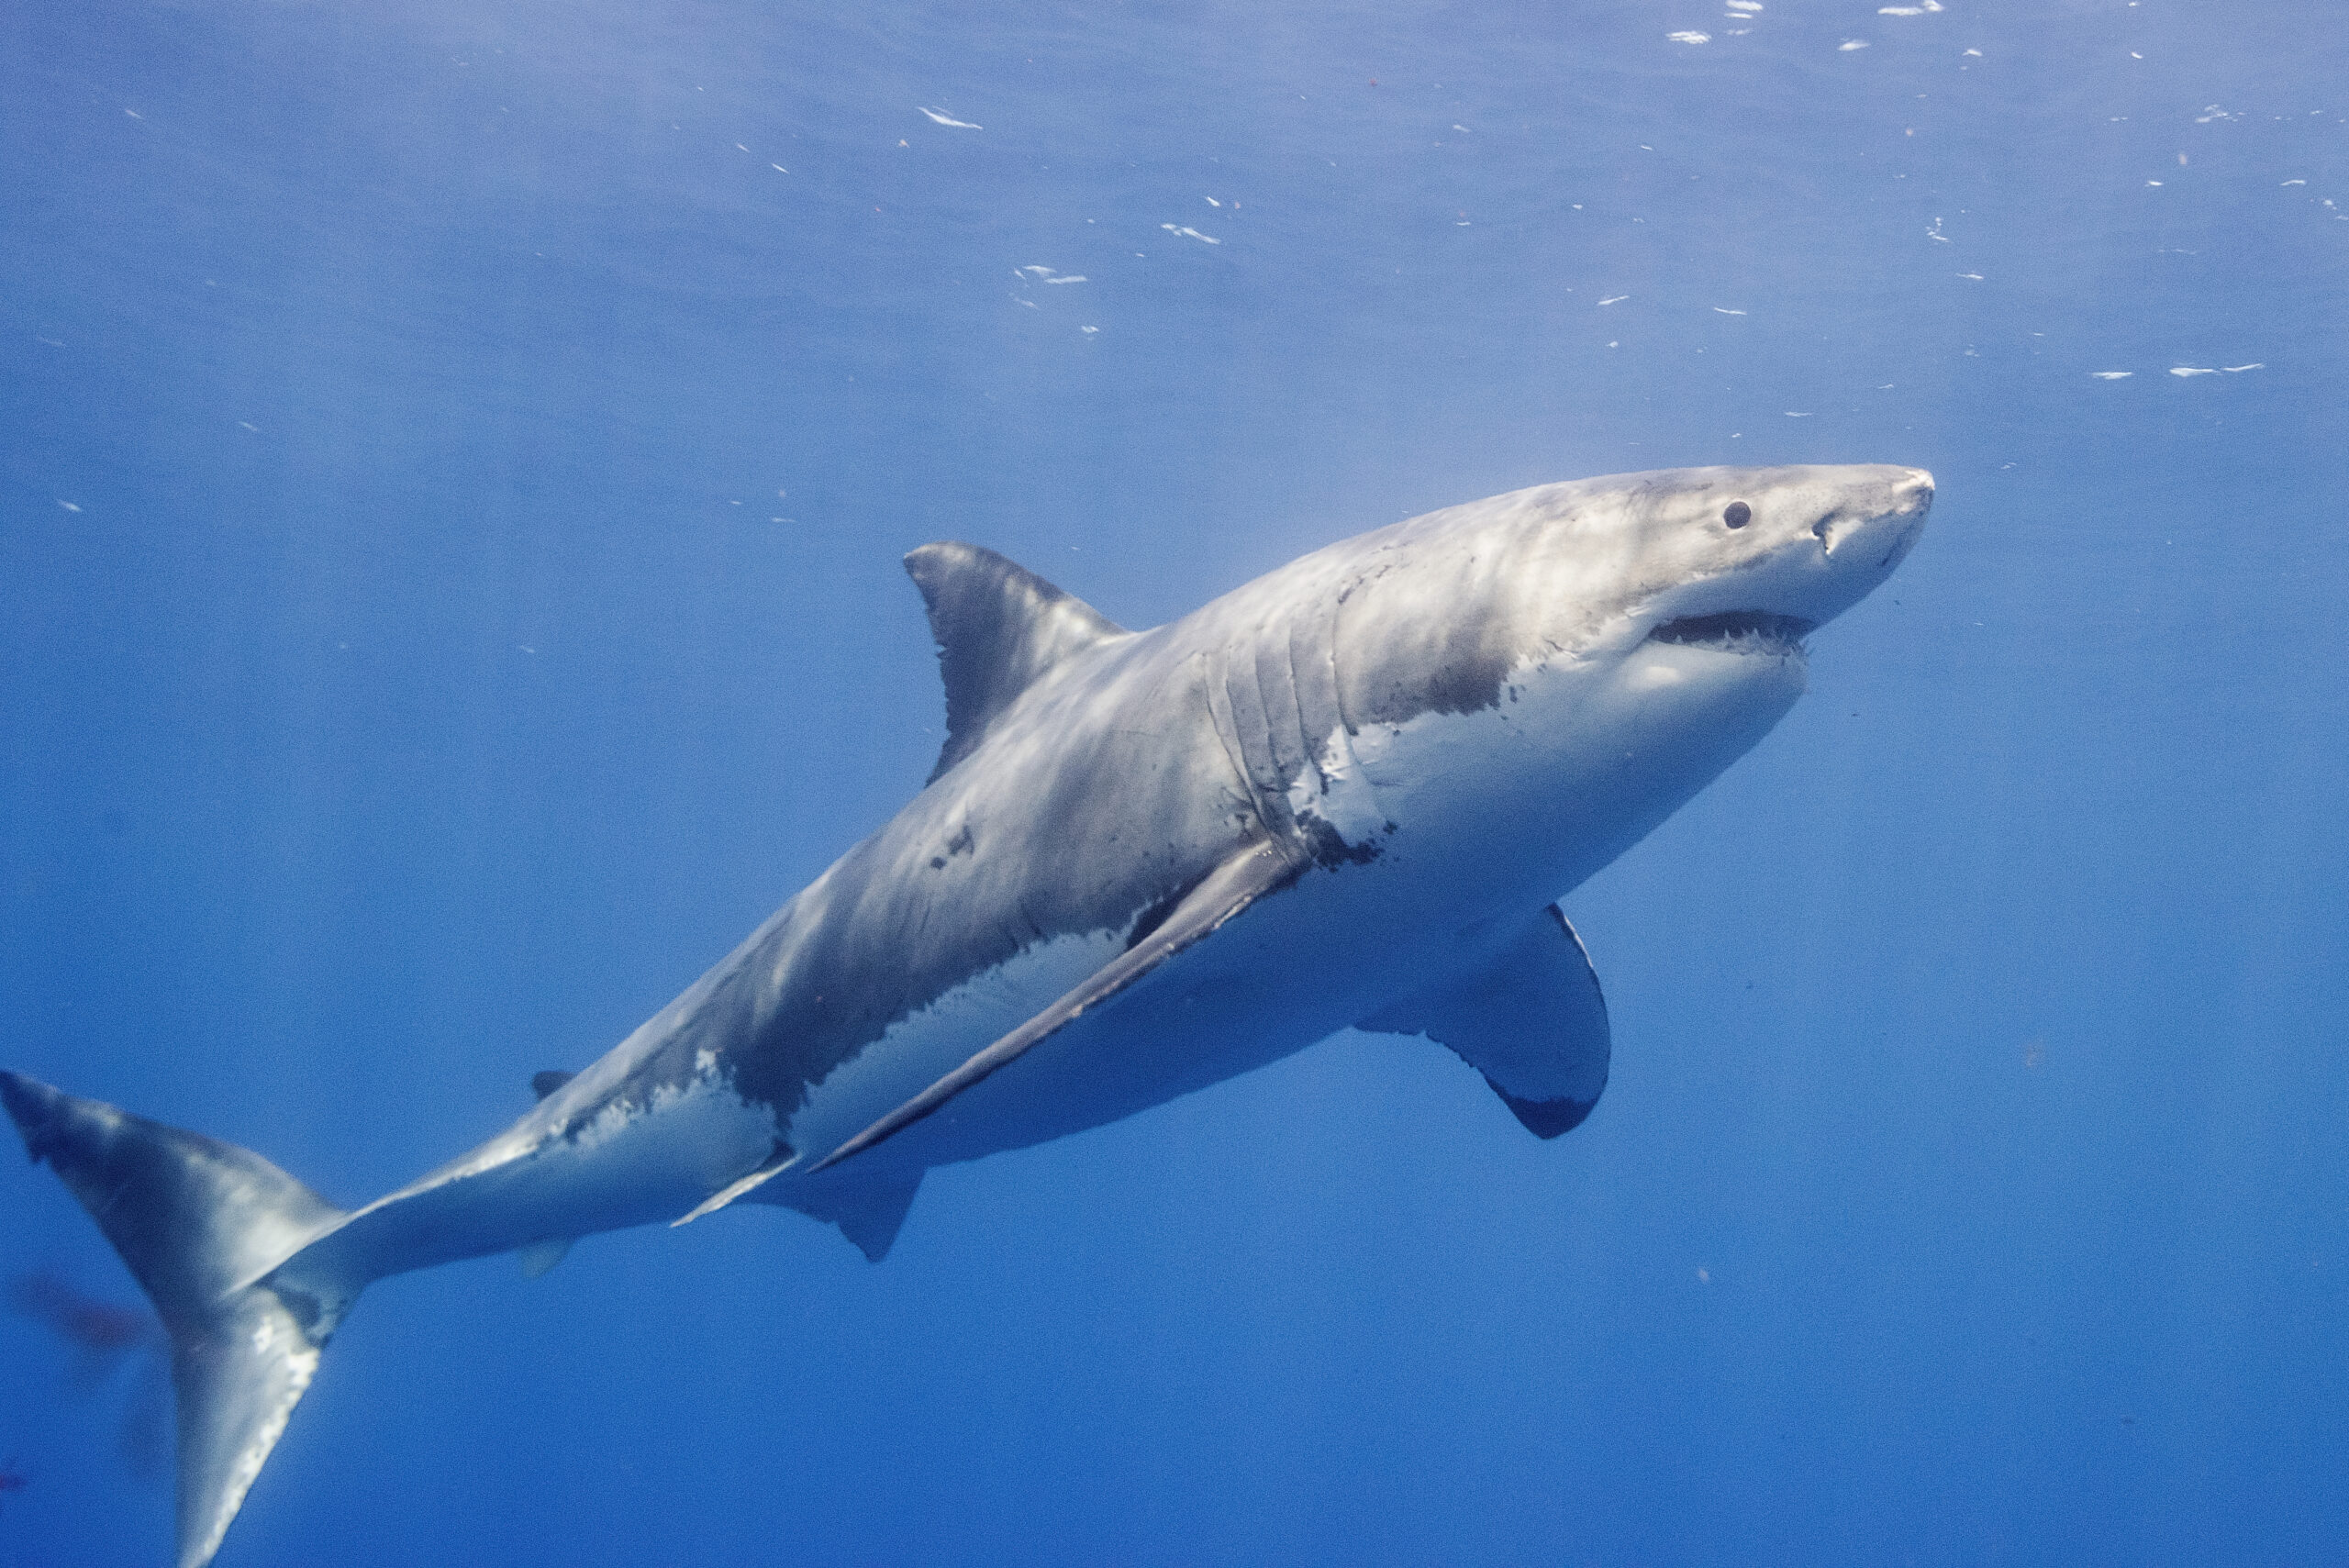 Great white sharks gather off the coast of Cape Cod in the summer